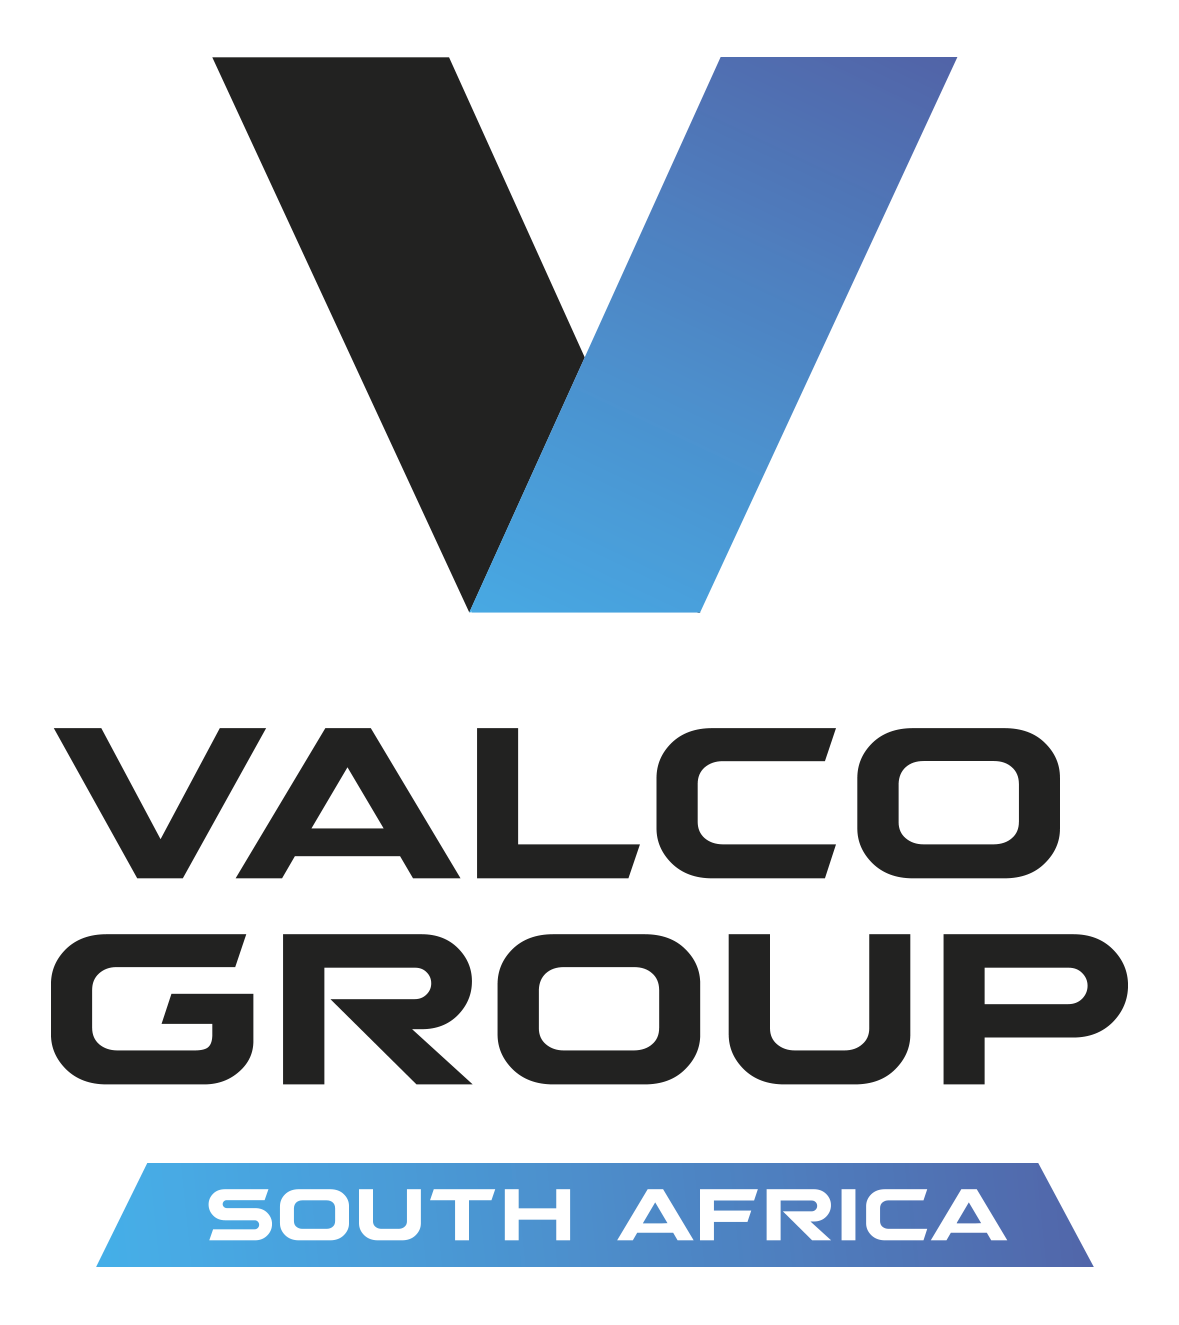 Valco-south-africa-1